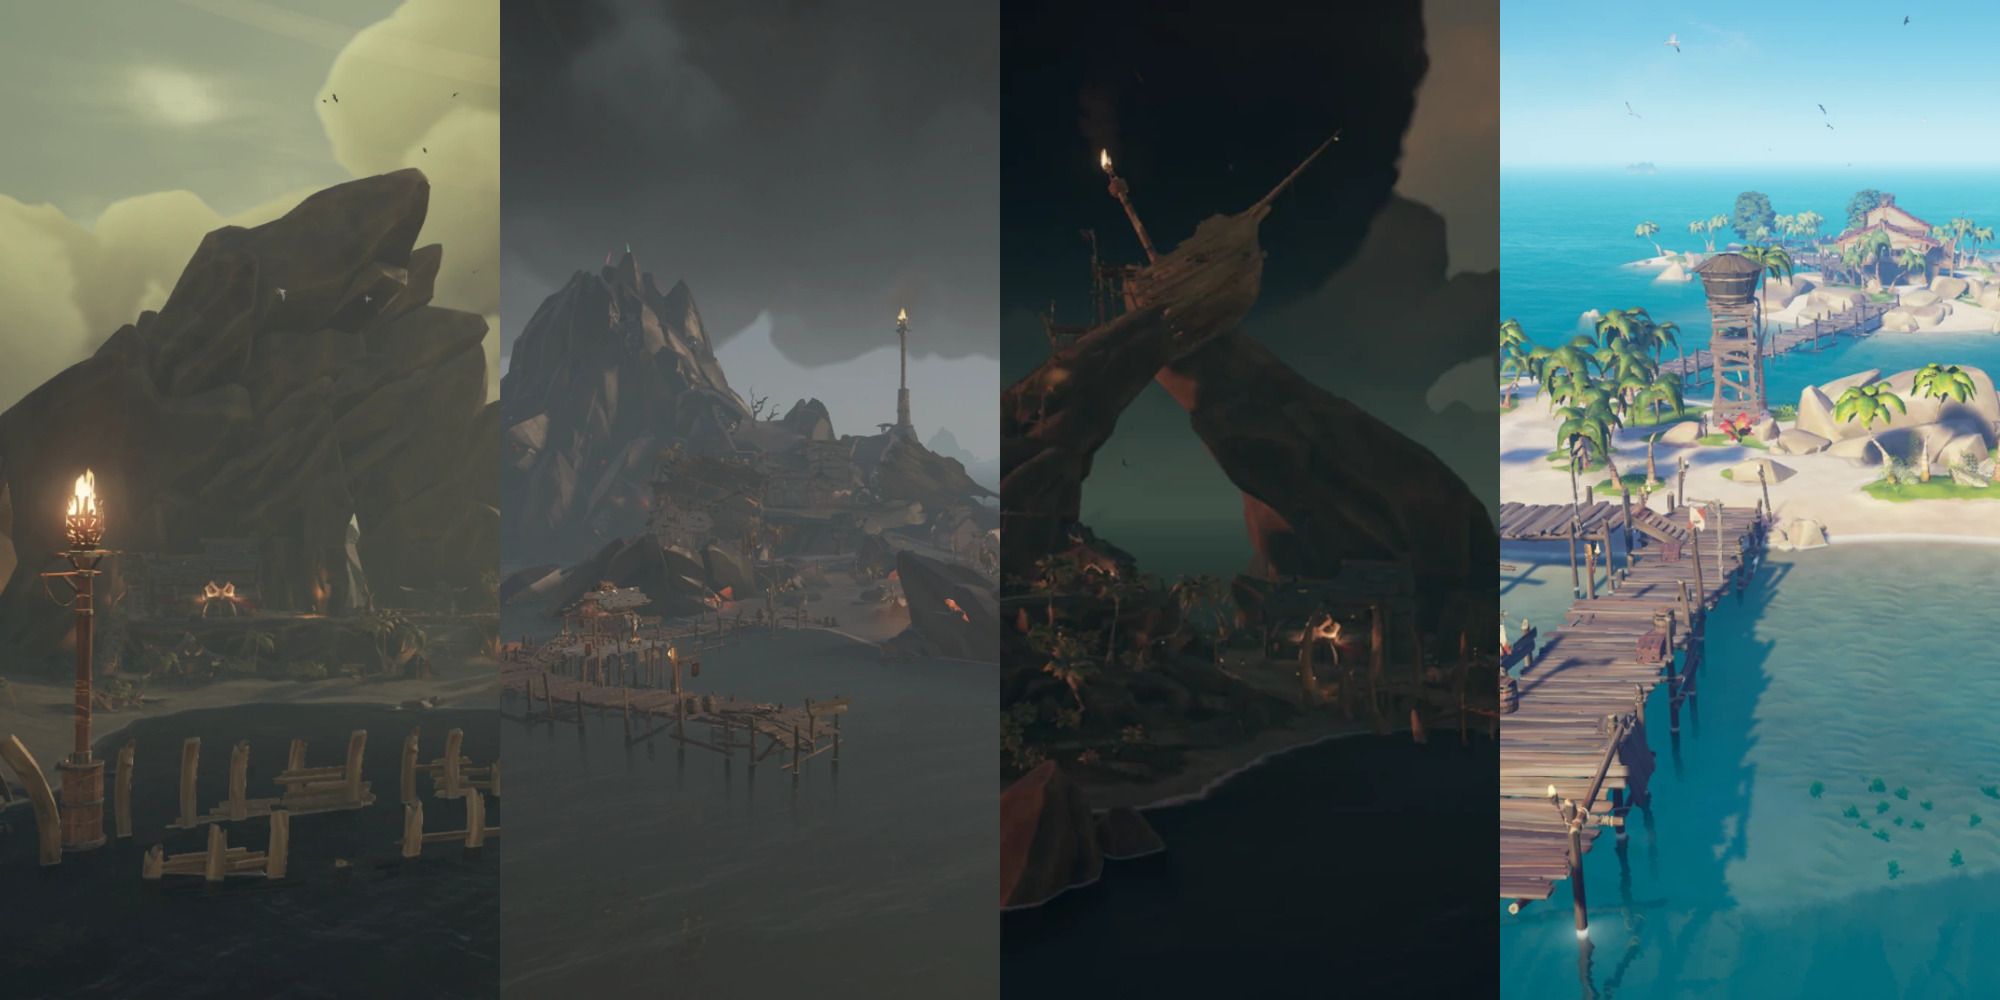 4 Outposts from Sea of Thieves pictured side by side